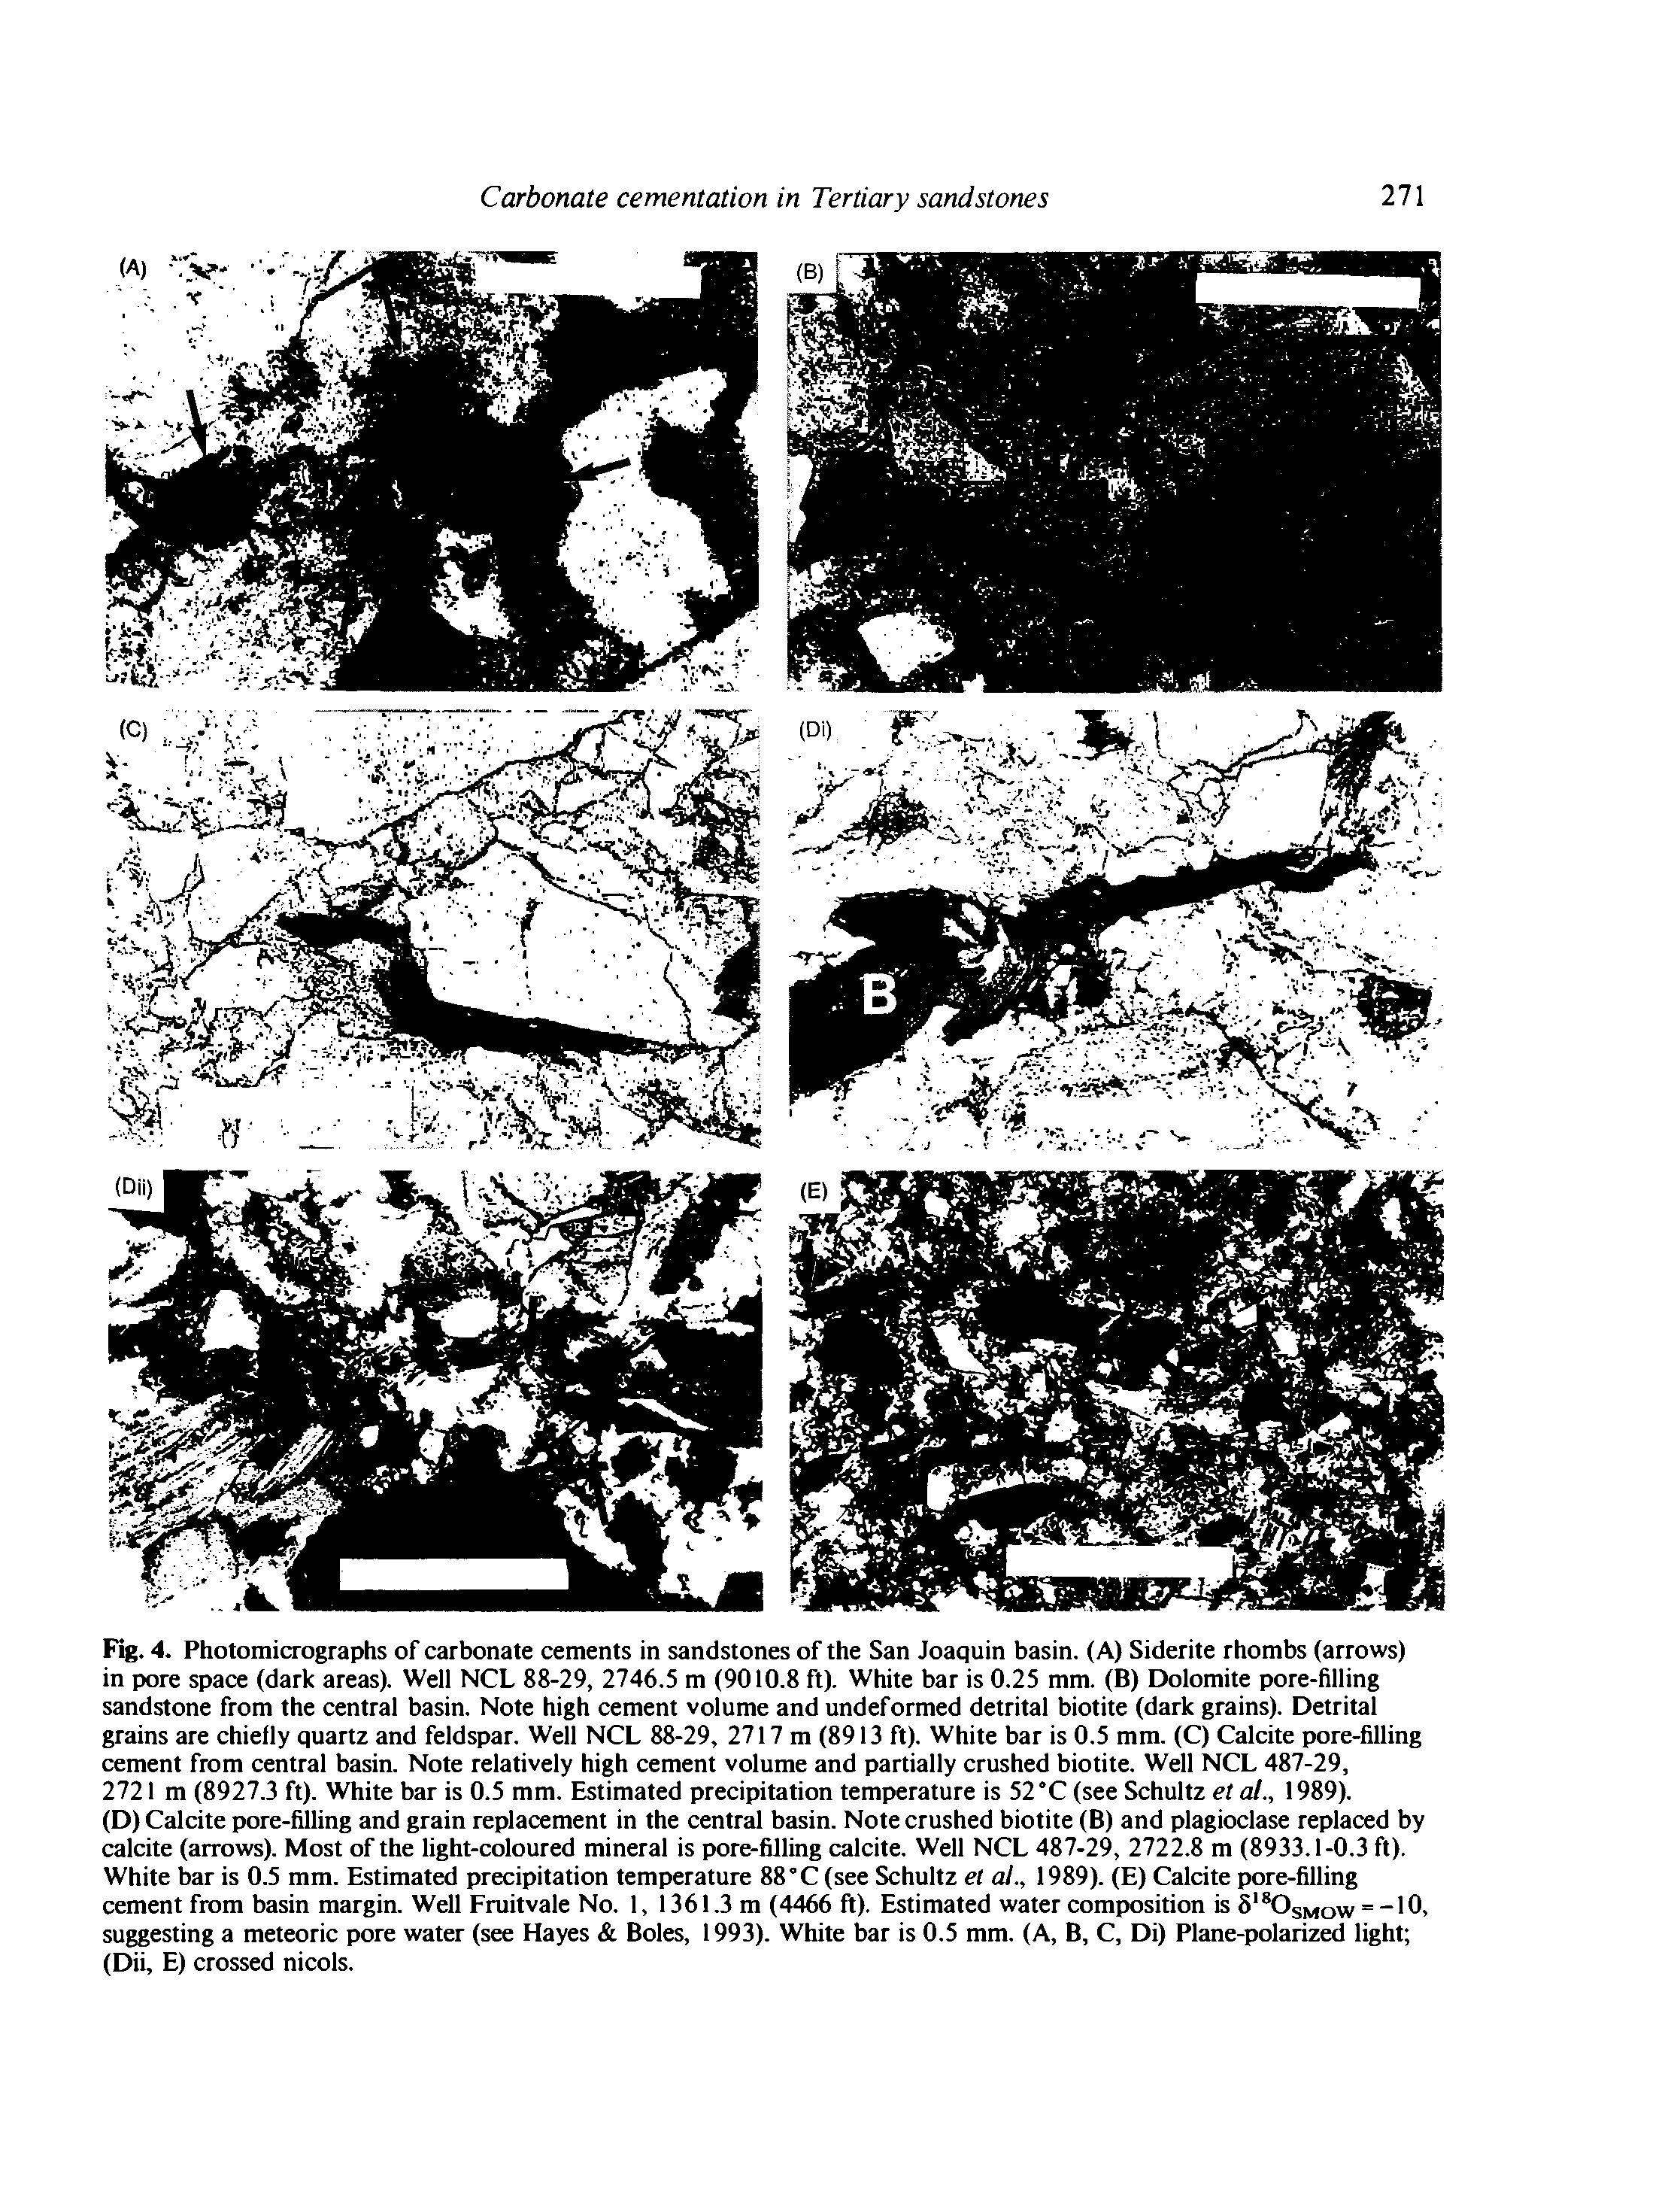 Fig. 4. Photomicrographs of carbonate cements in sandstones of the San Joaquin basin. (A) Siderite rhombs (arrows) in pore space (dark areas). Well NCL 88-29, 2746.5 m (9010.8 ft). White bar is 0.25 mm. (B) Dolomite pore-filling sandstone from the central basin. Note high cement volume and undeformed detrital biotite (dark grains). Detrital grains are chiefly quartz and feldspar. Well NCL 88-29, 2717 m (8913 ft). White bar is 0.5 mm. (C) Calcite pore-filling cement from central basin. Note relatively high cement volume and partially crushed biotite. Well NCL 487-29,...